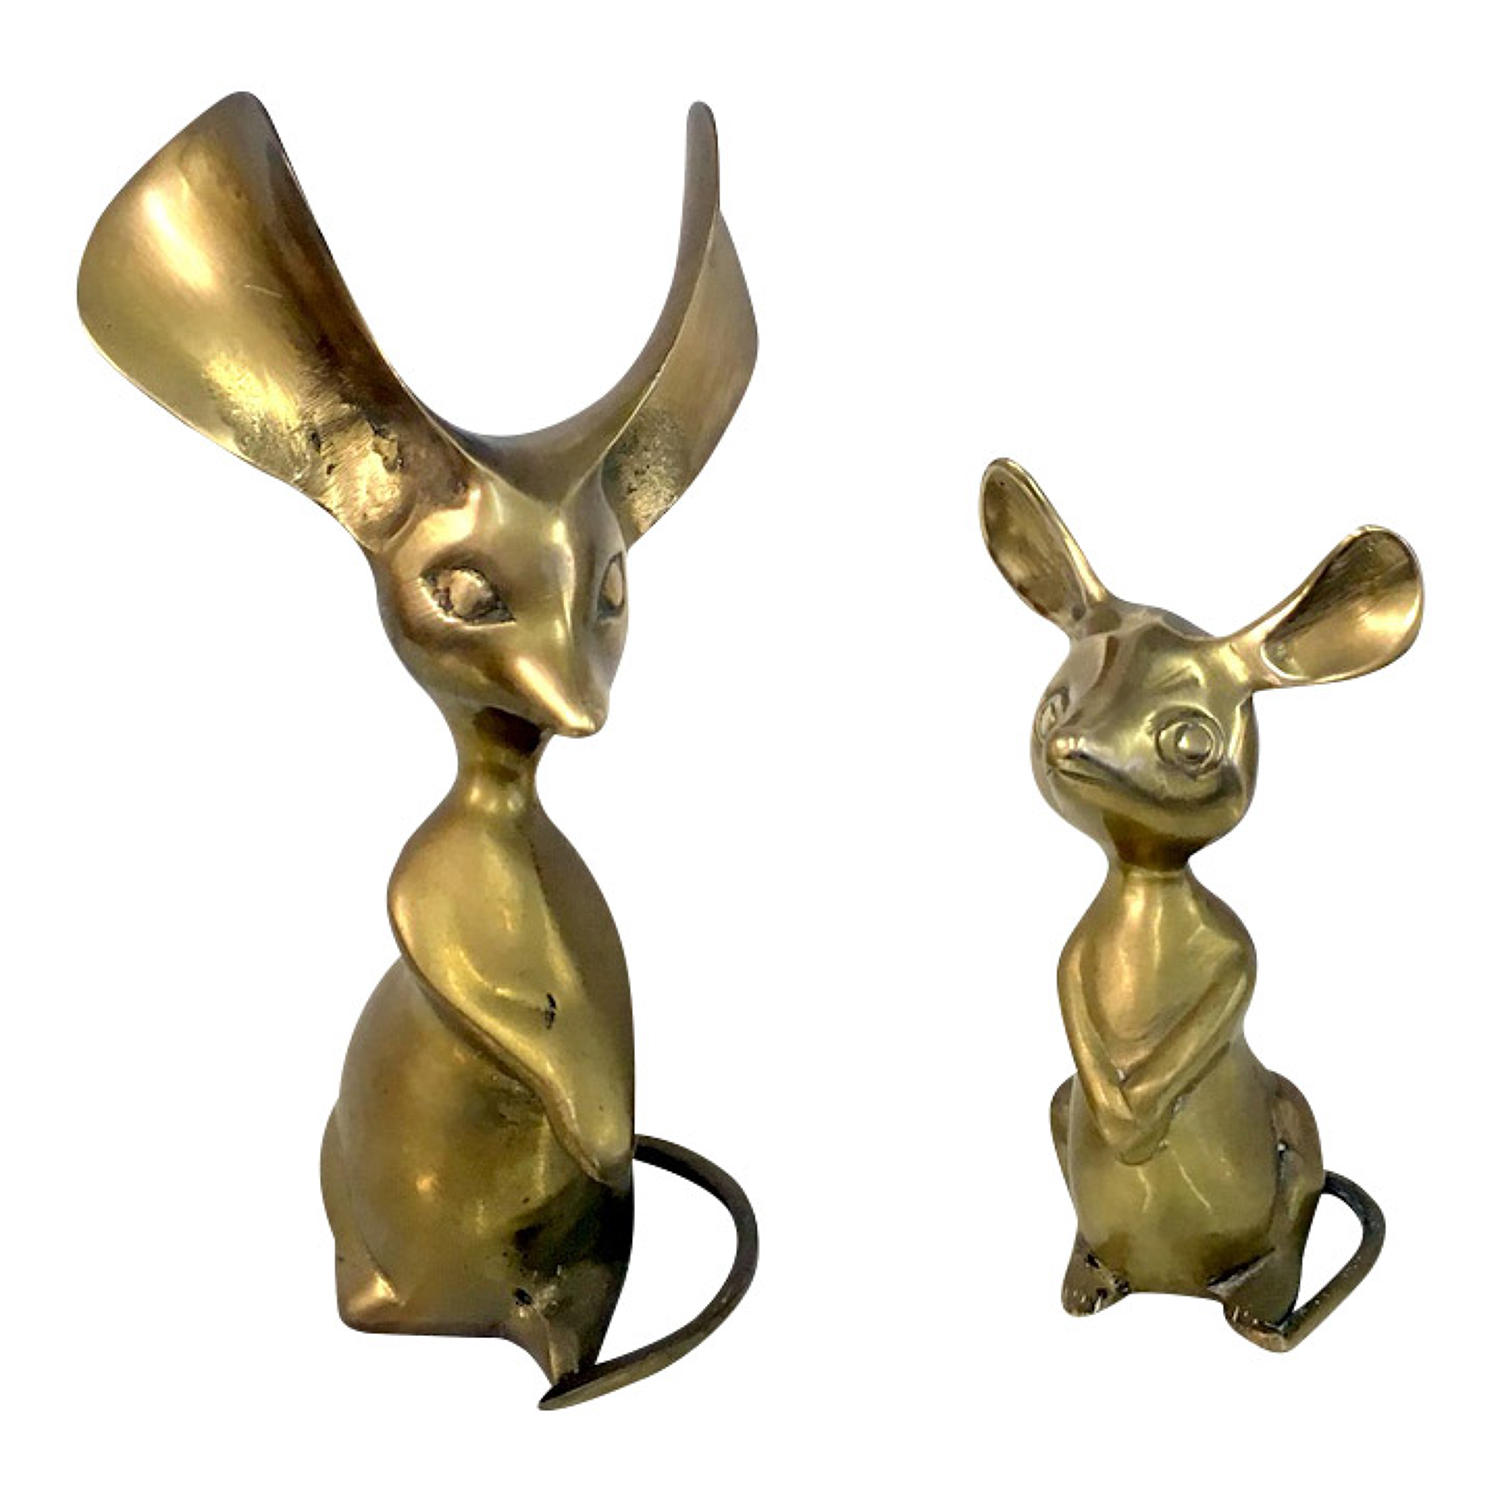 A pair of stylized mice figures